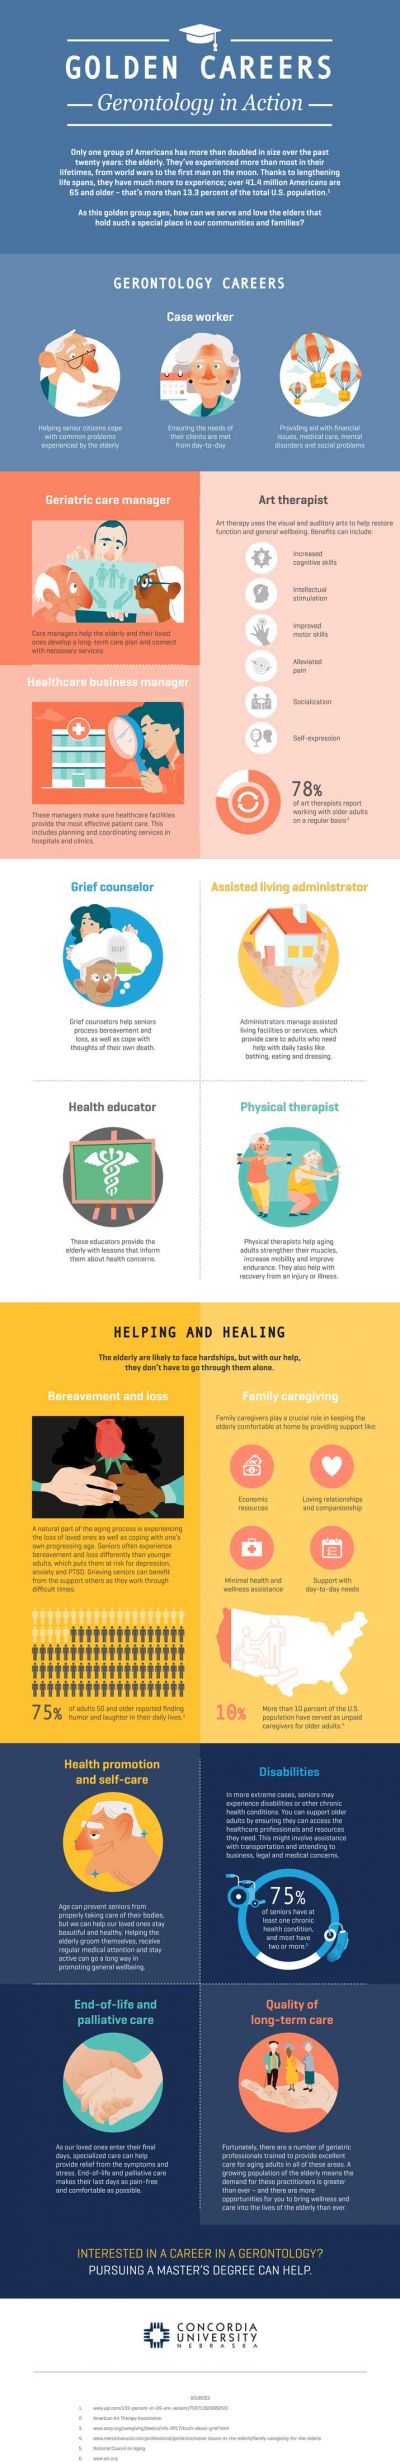 Gerontology Infographic from Concordia University